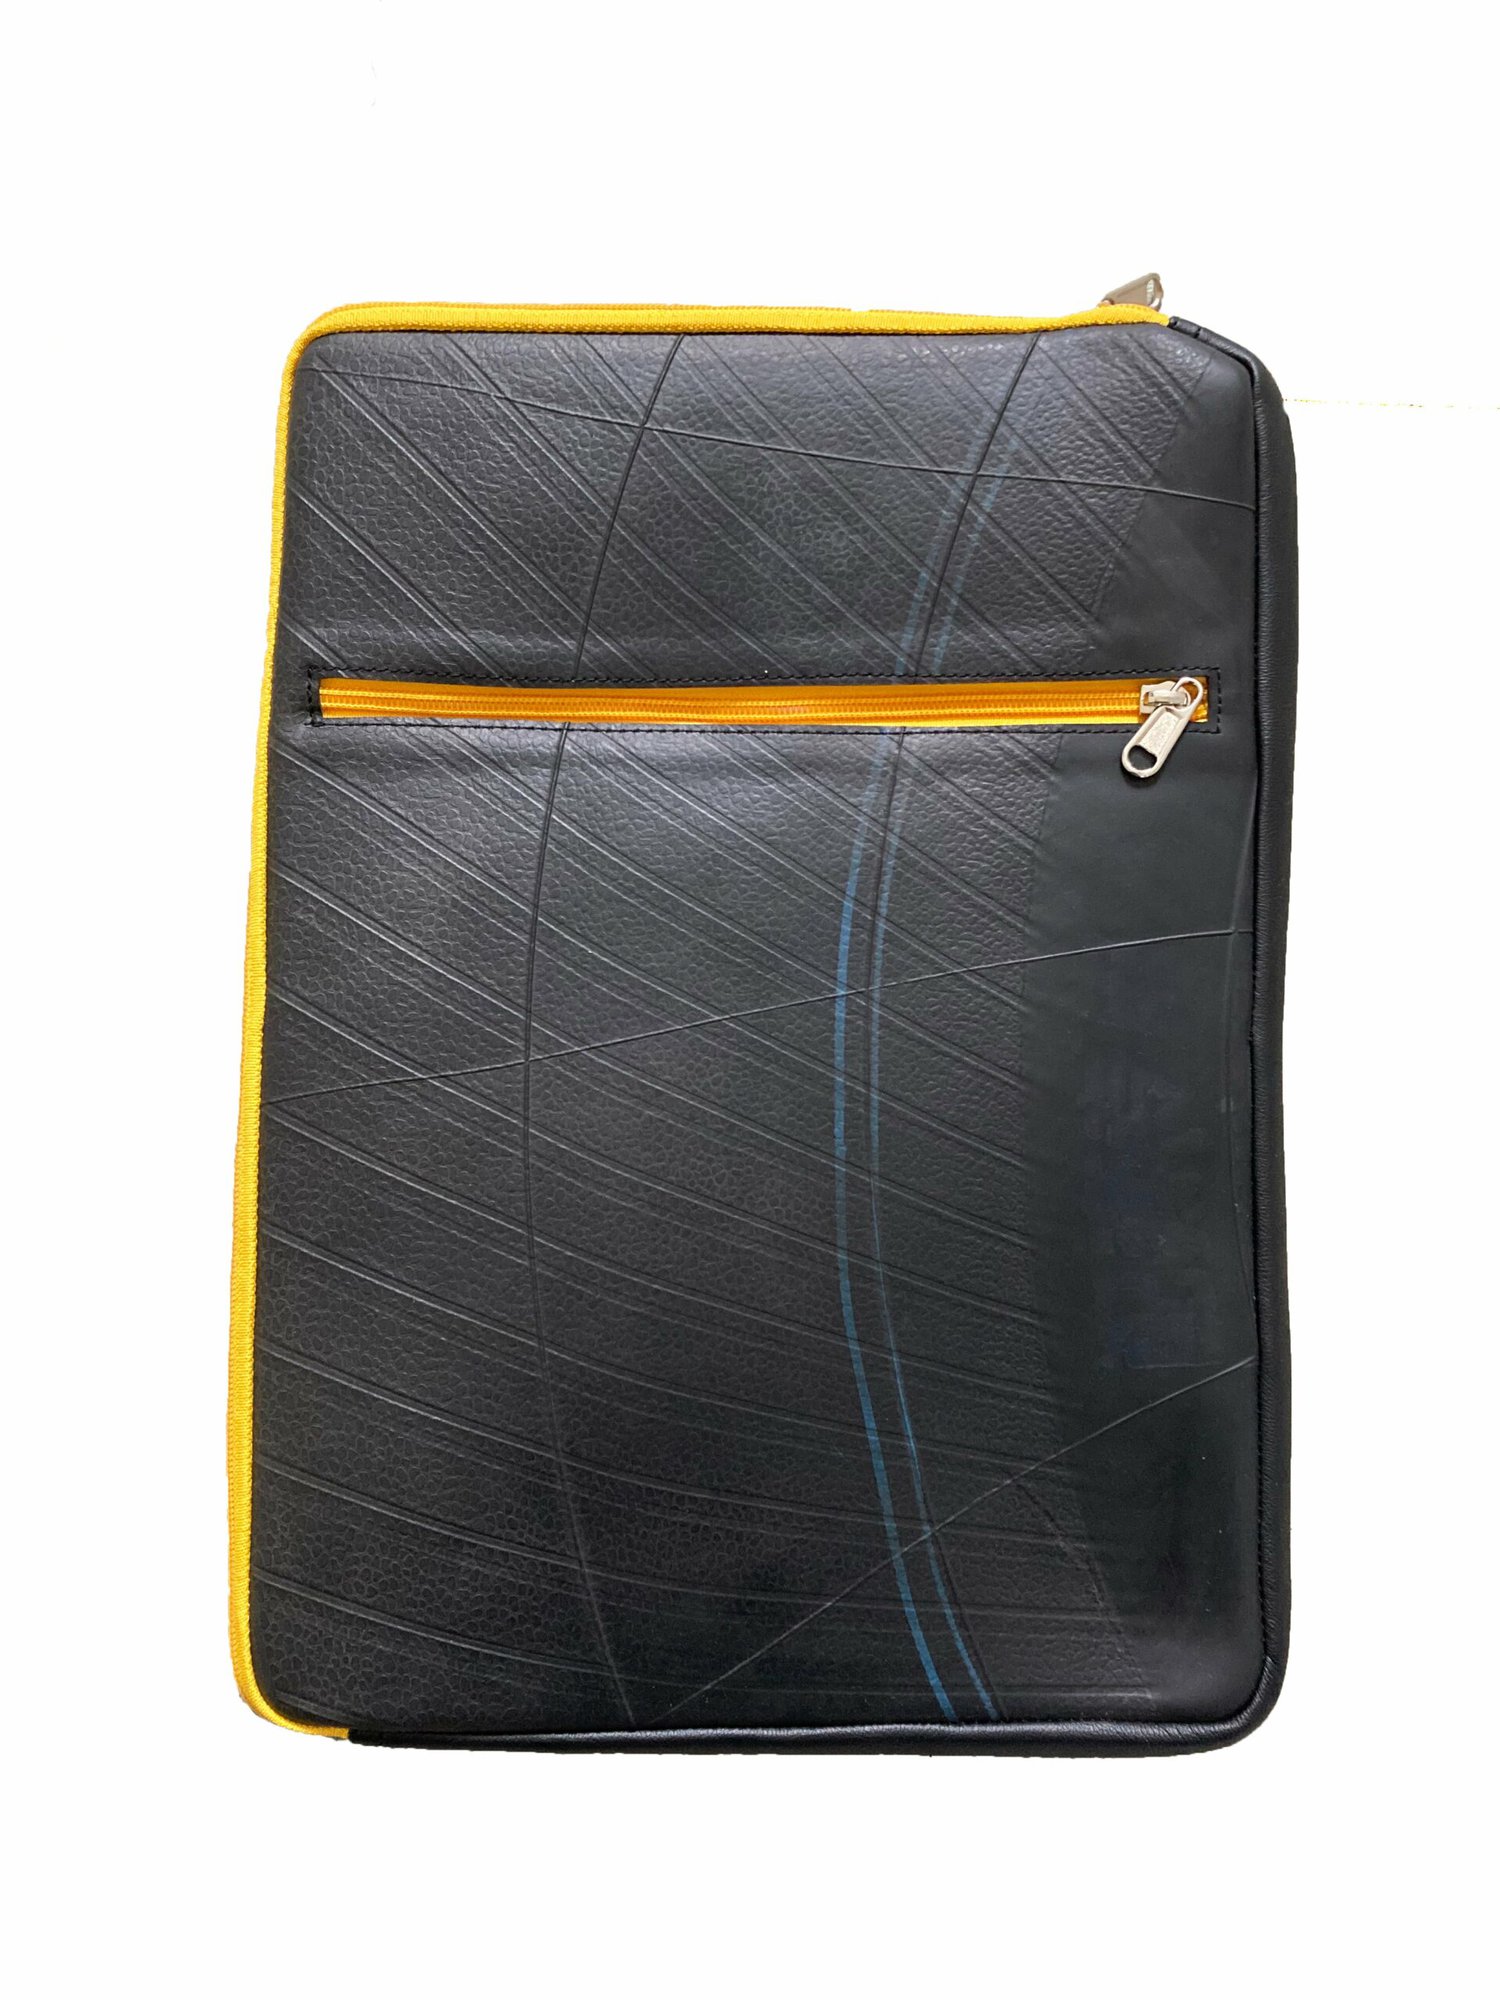 Recycled Inner Tube Sleeve Case For Laptops Up To 15 Inch -